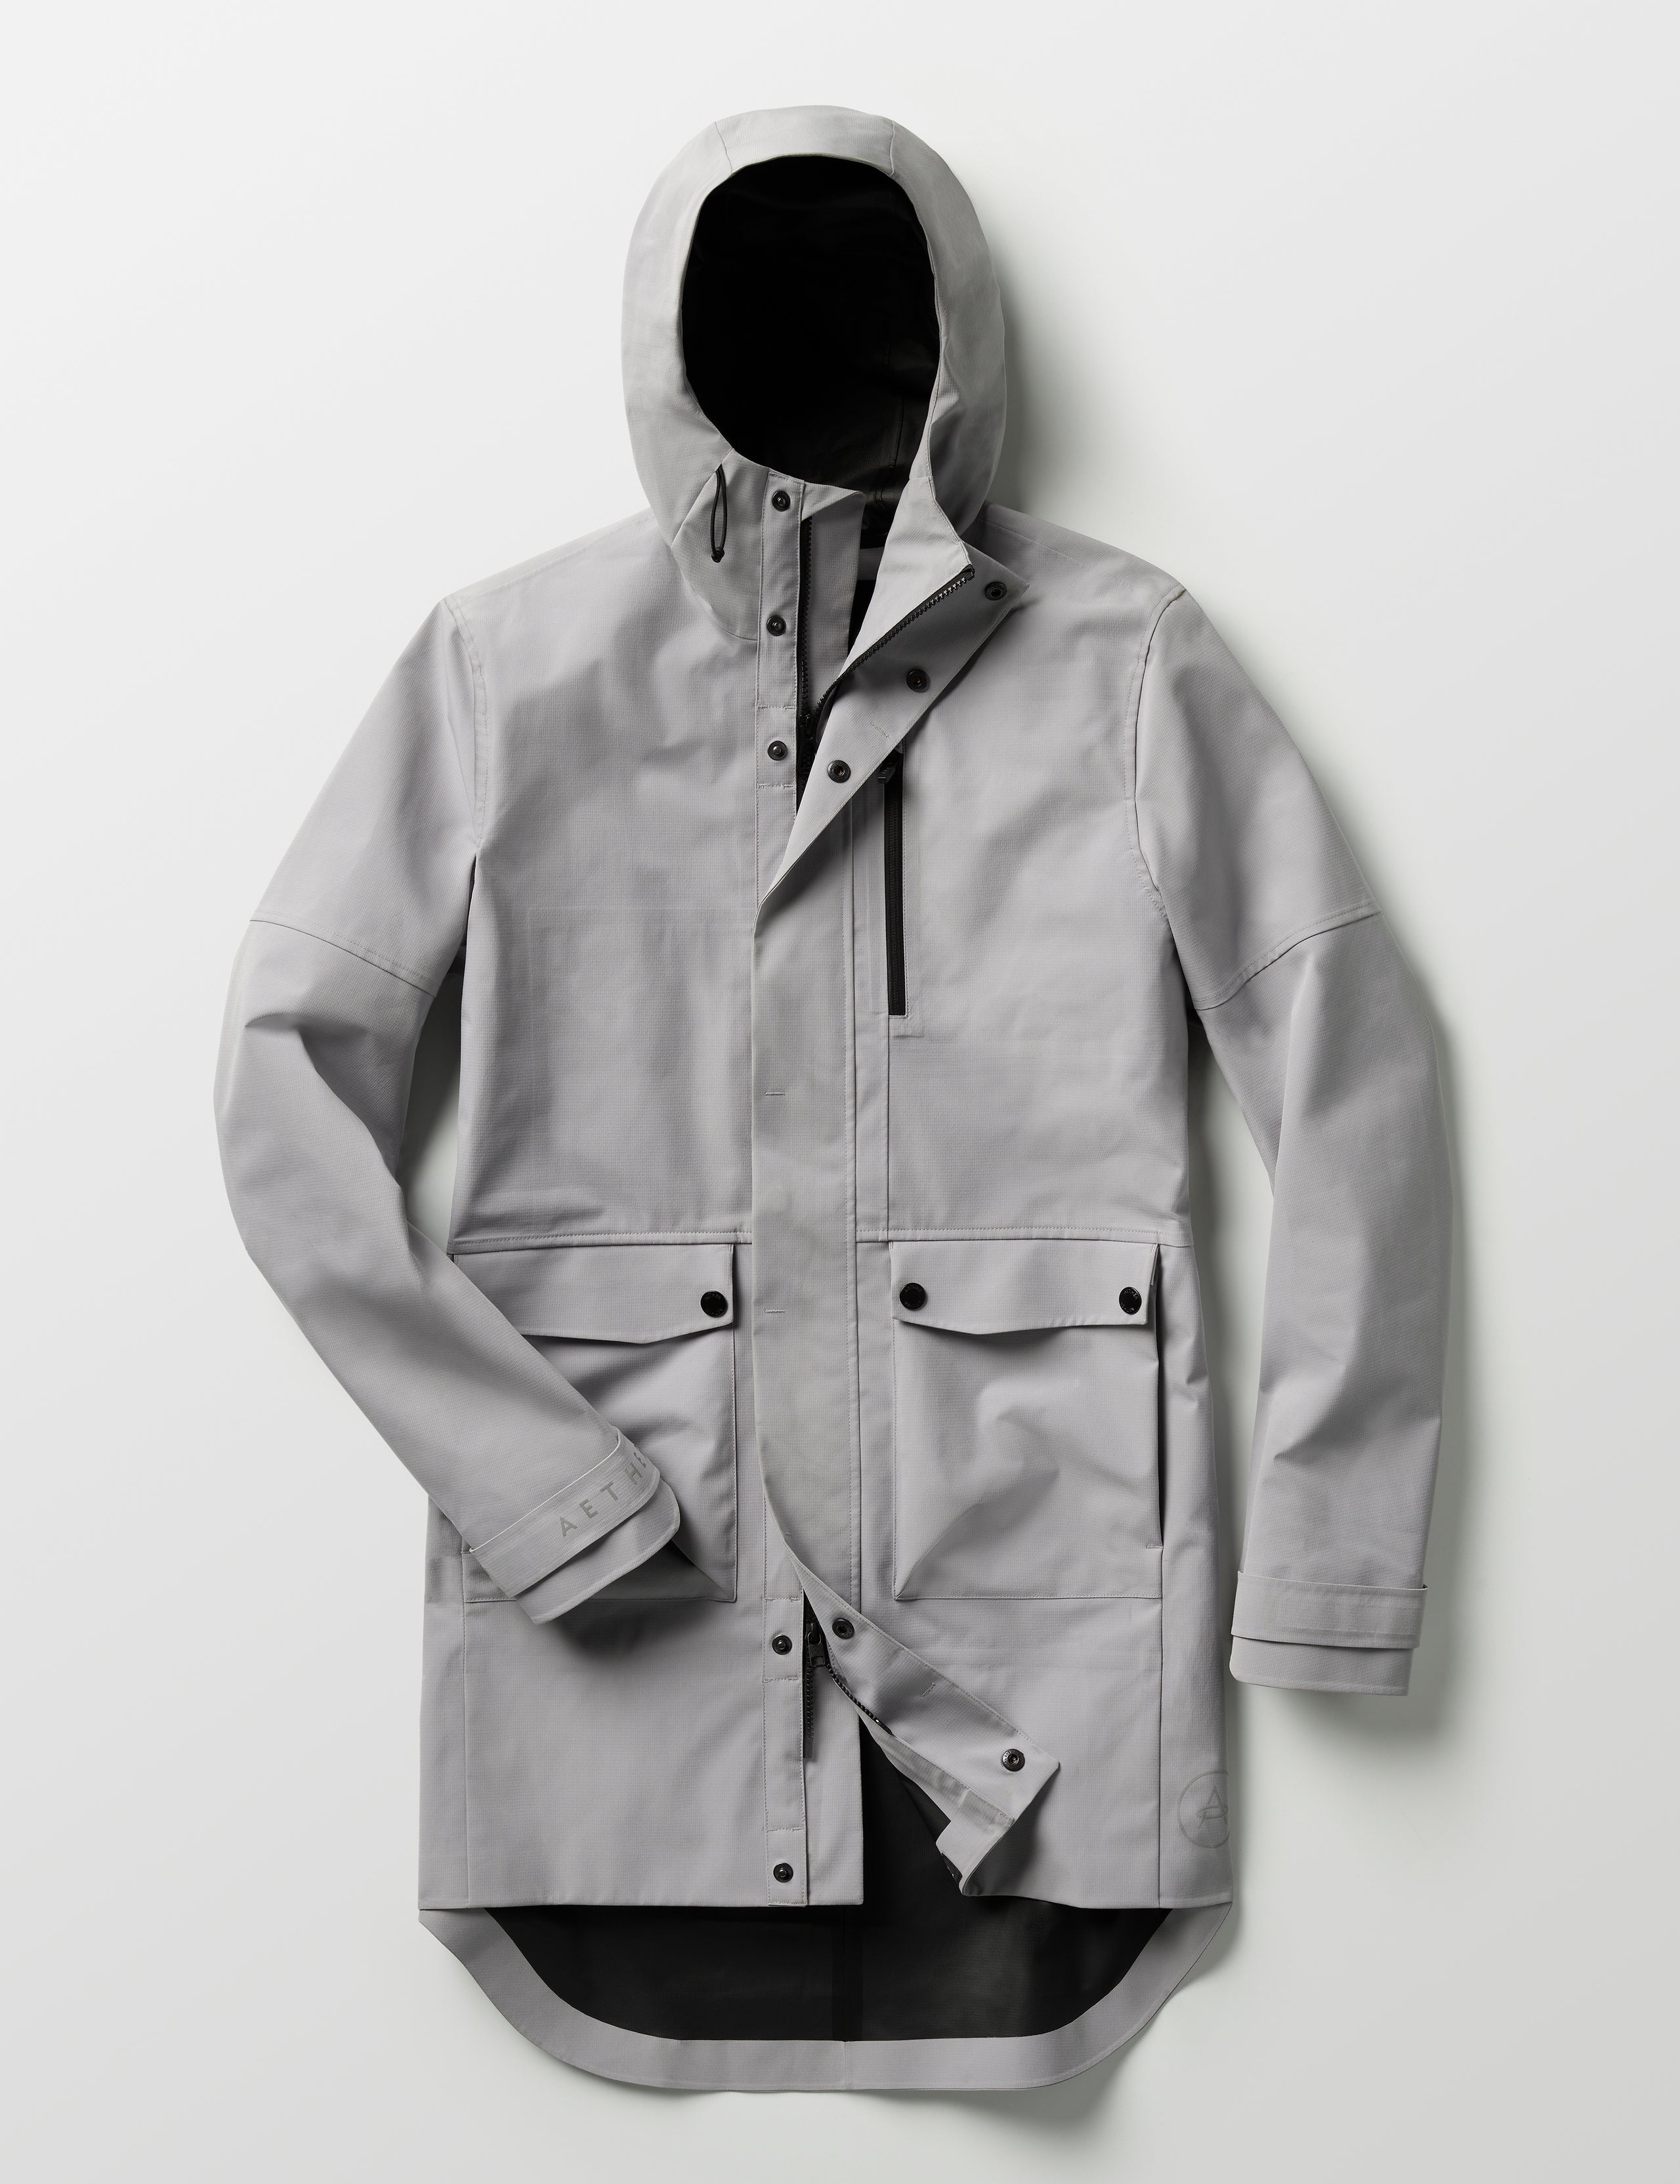 Grey men's rain jacket from AETHER Apparel